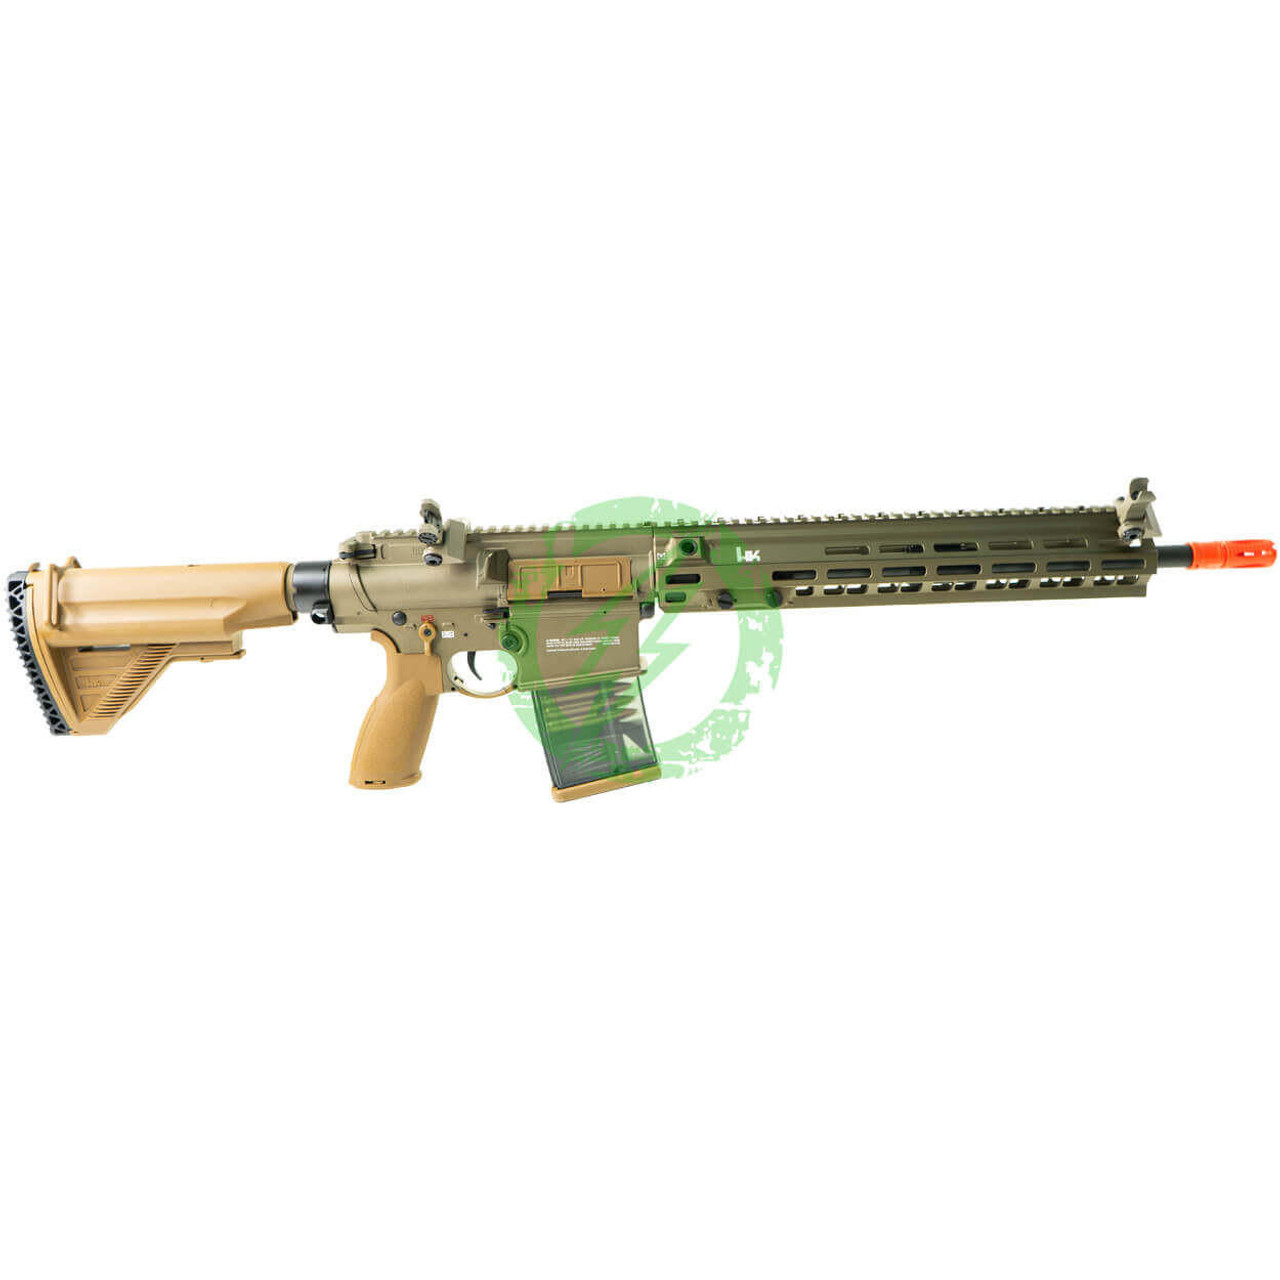  Umarex Elite Force HK M110A1 Rifle with Gate Aster 